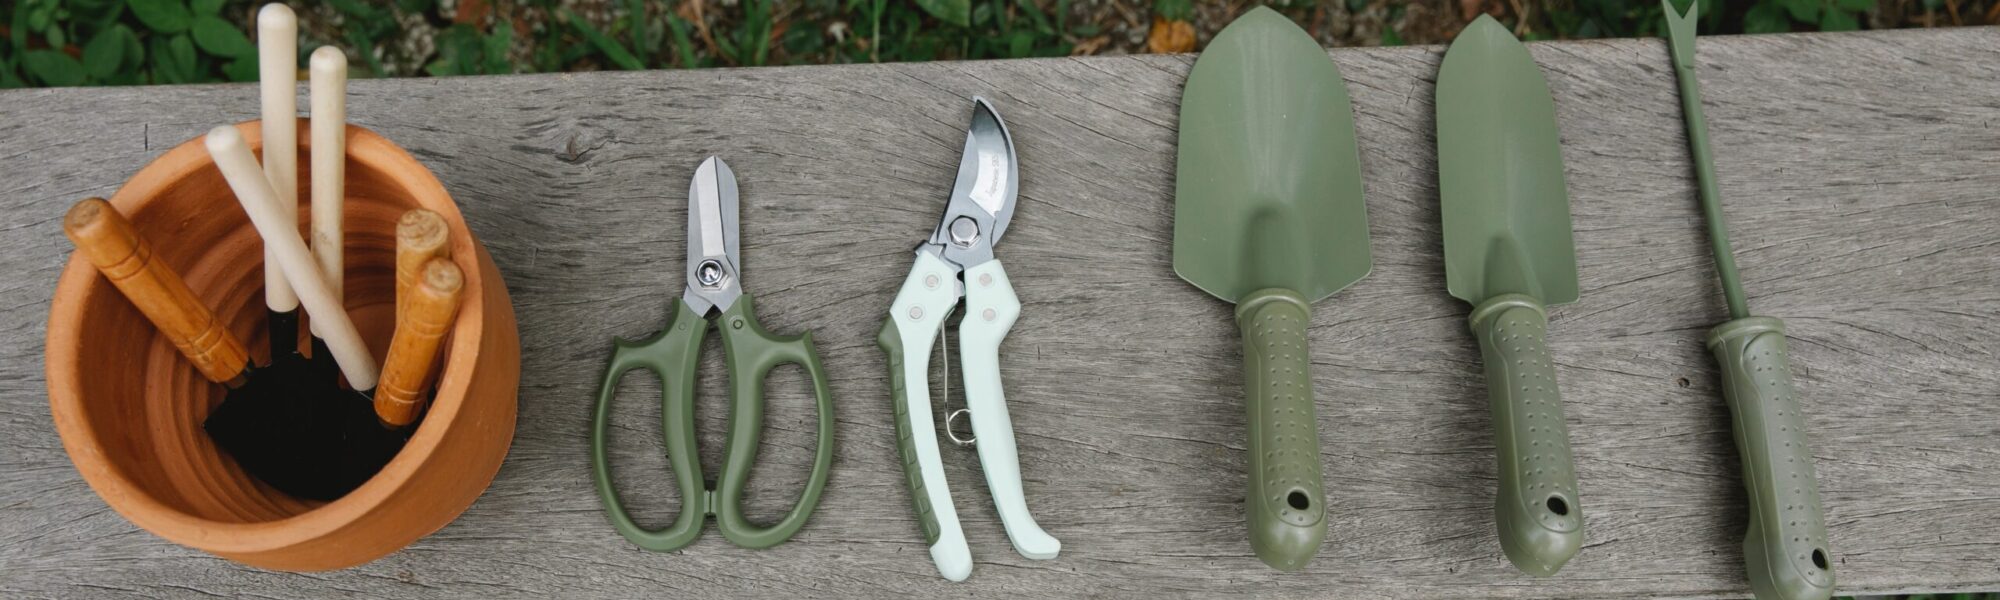 gardening tools are placed in a row